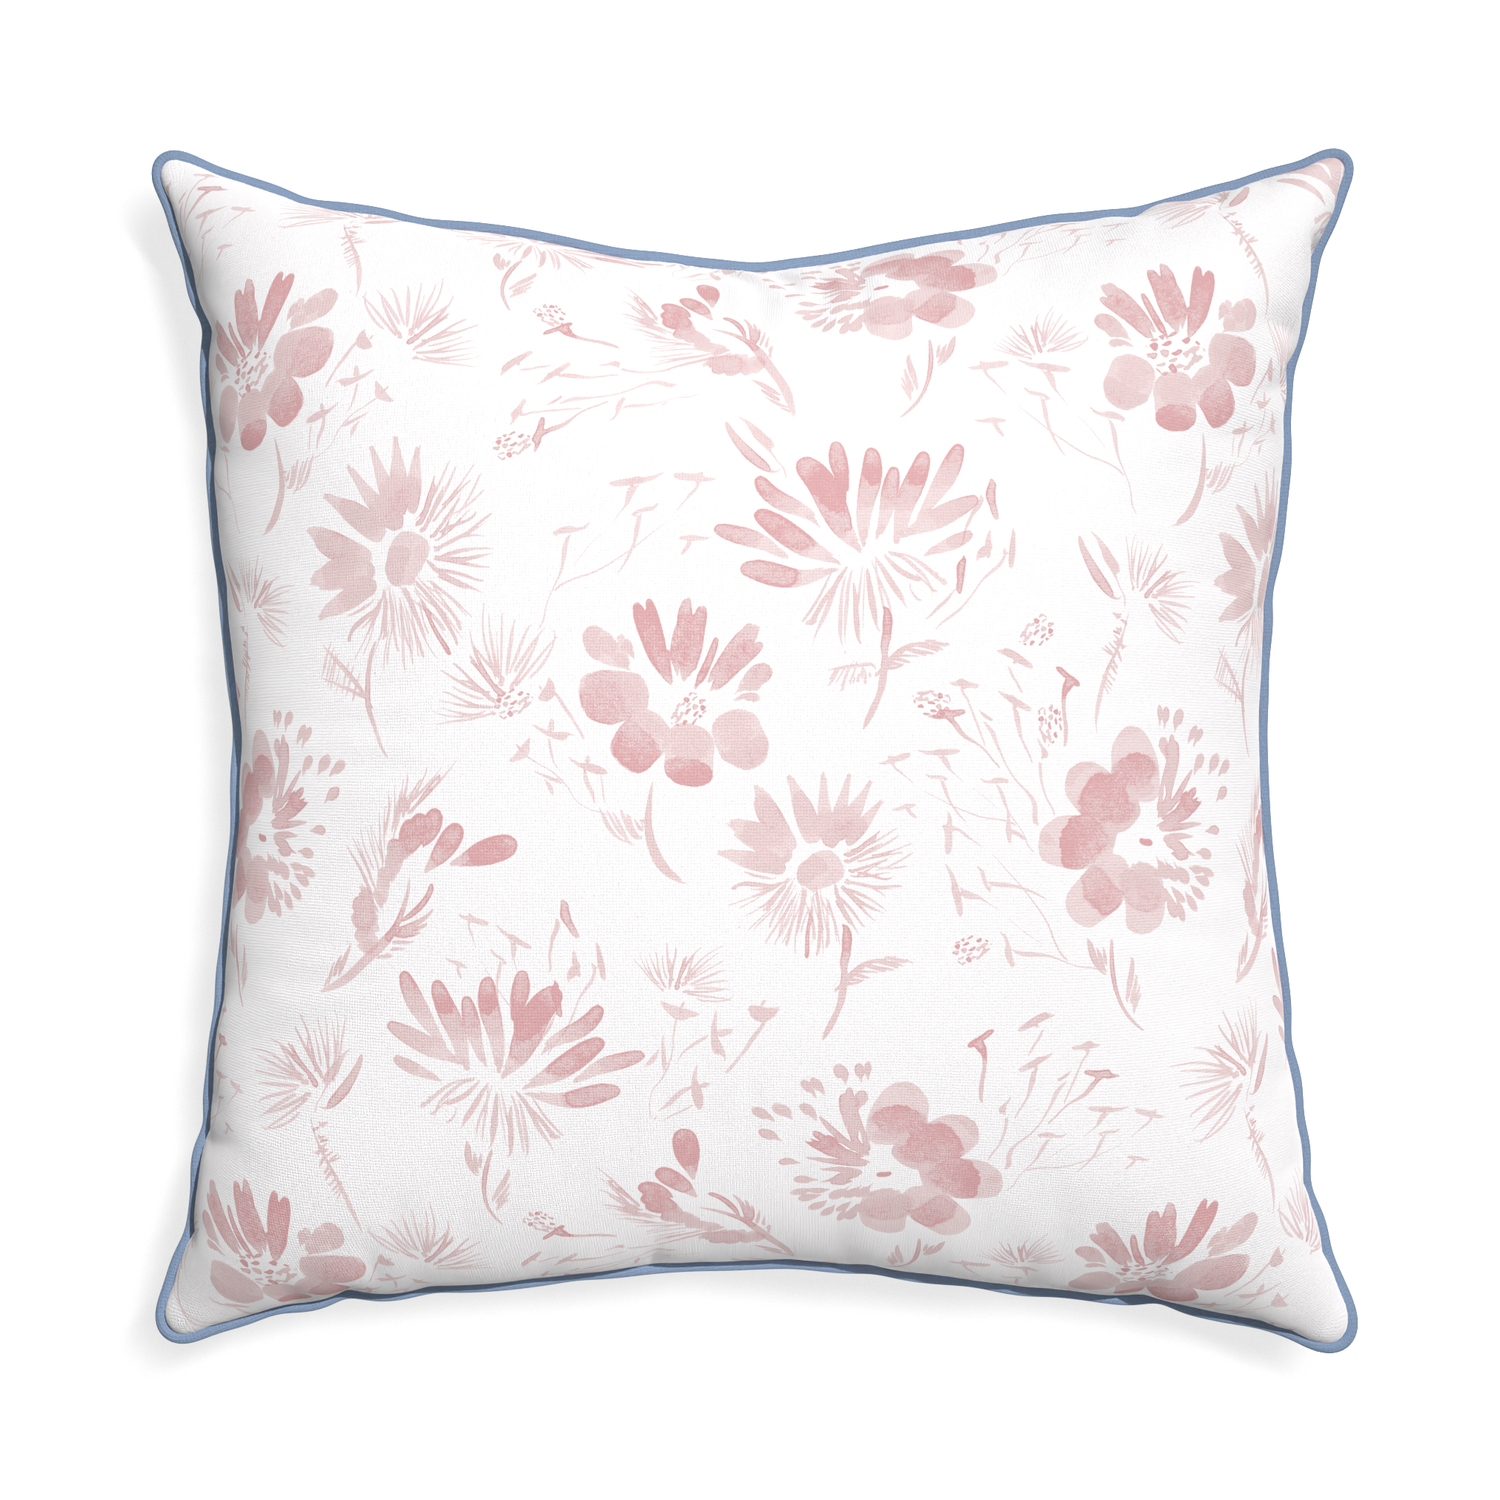 Euro-sham blake custom pink floralpillow with sky piping on white background